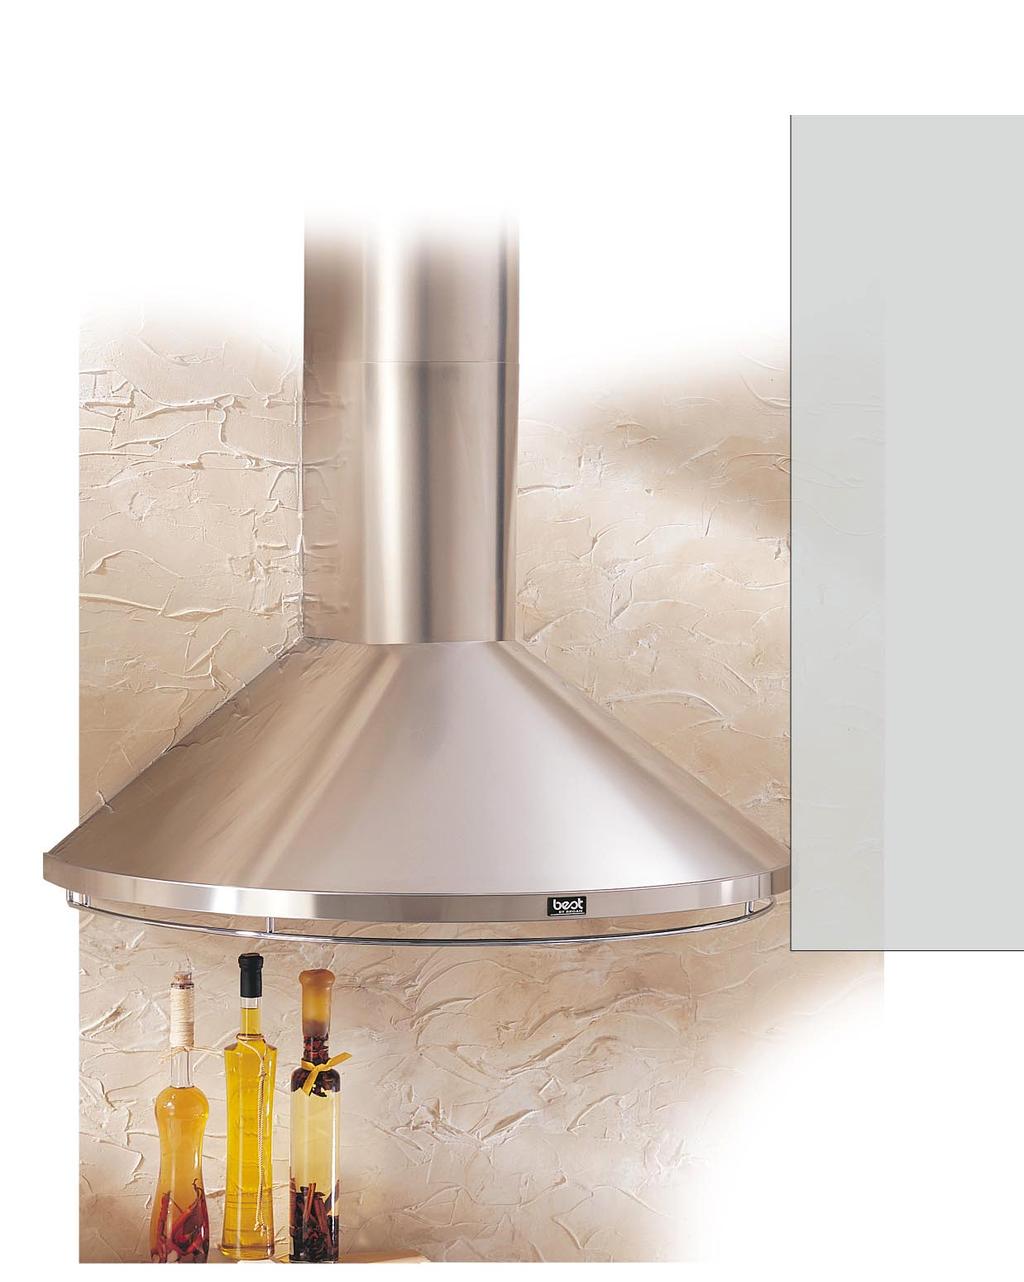 CHIMNEY HOODS Seamless in design and organic in form, this range hood rises gracefully with an understated elegance.